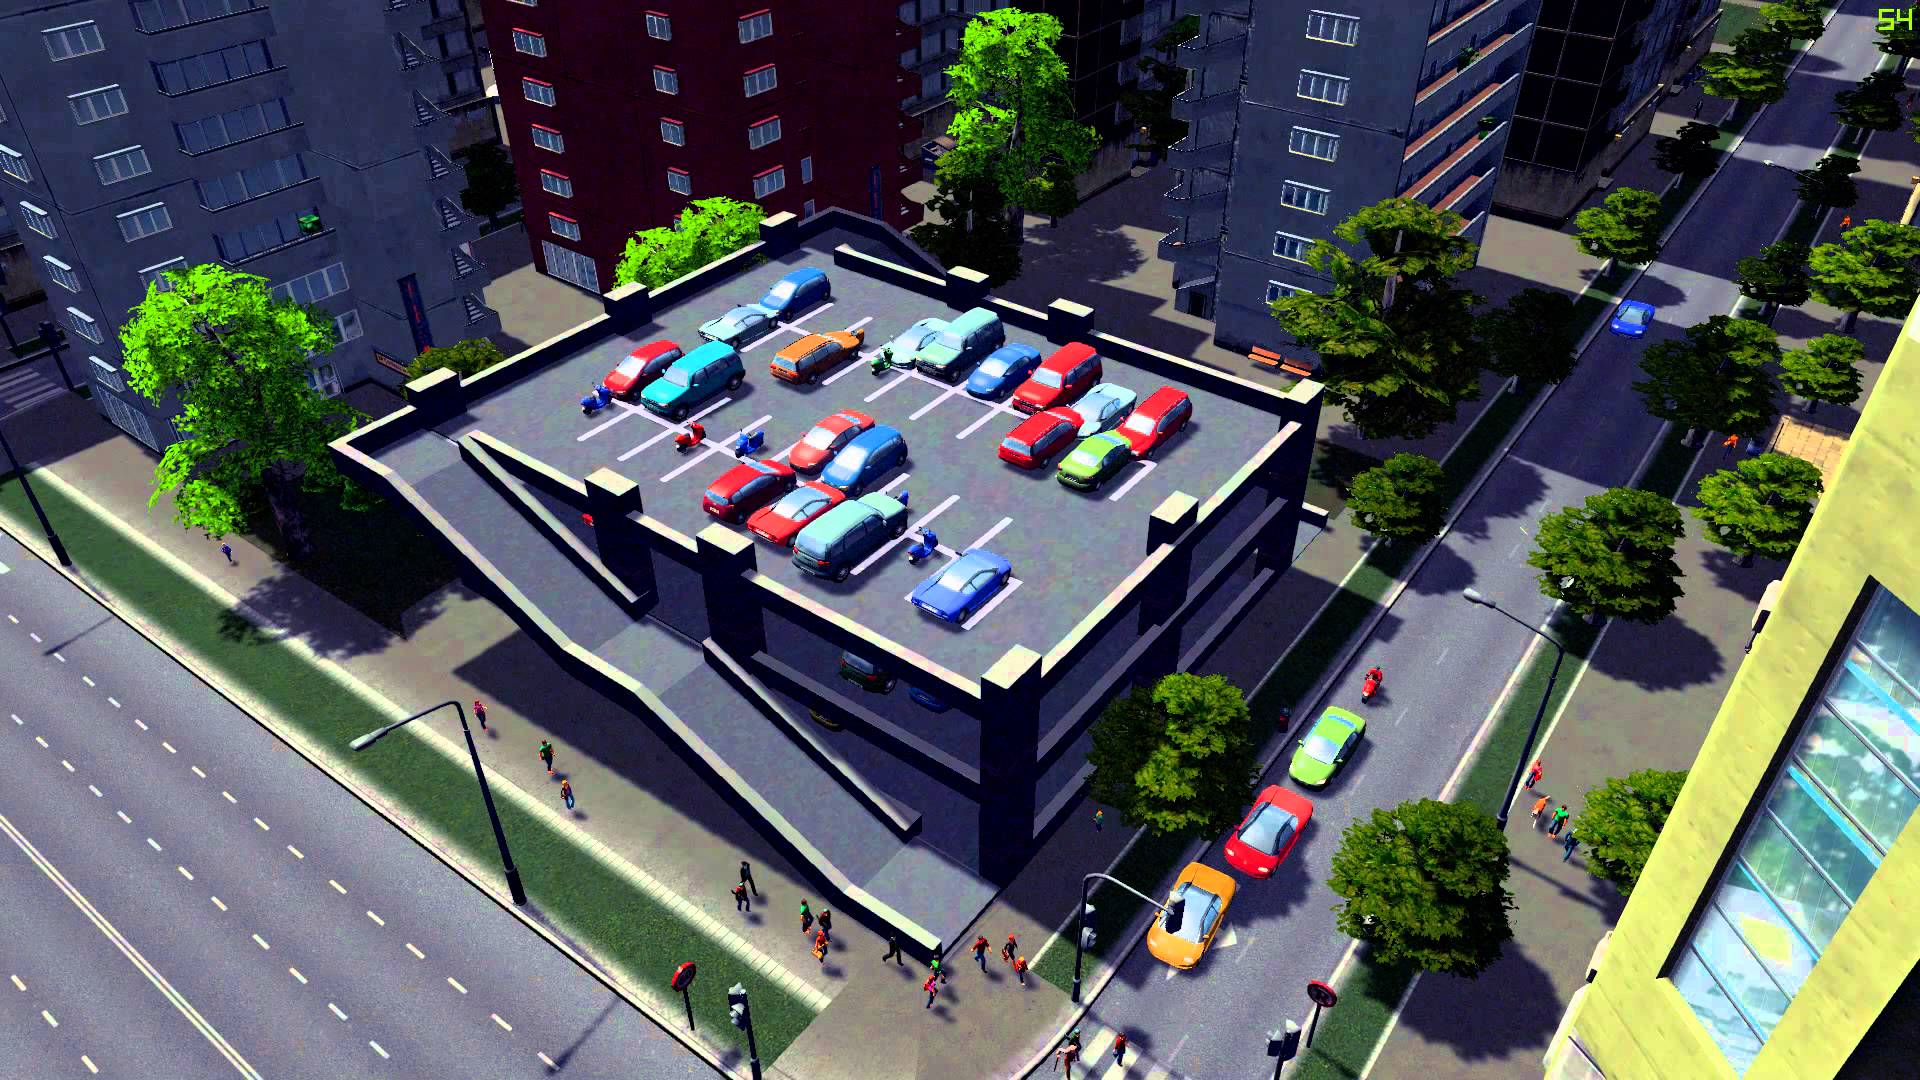 Parking lot addon for Cities: Skylines - YouTube